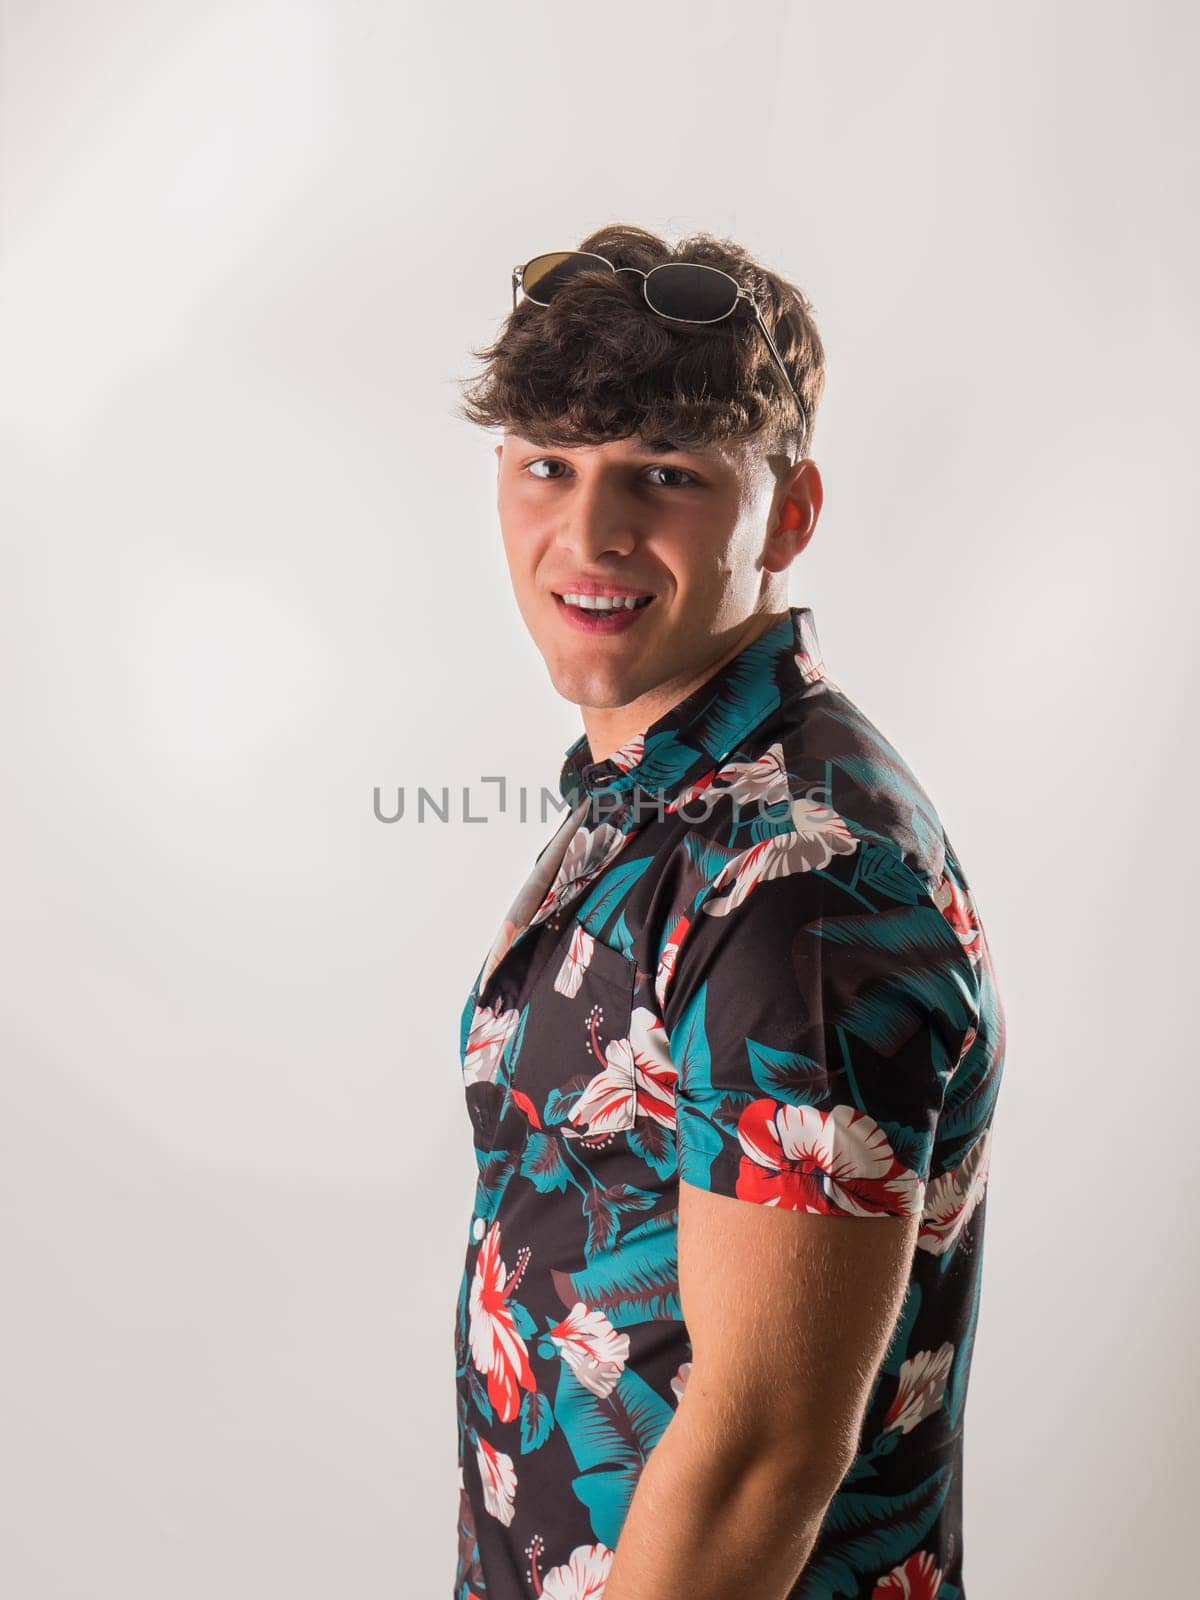 Attractive, muscular young man smiling, wearing open hawaian style shirt by artofphoto